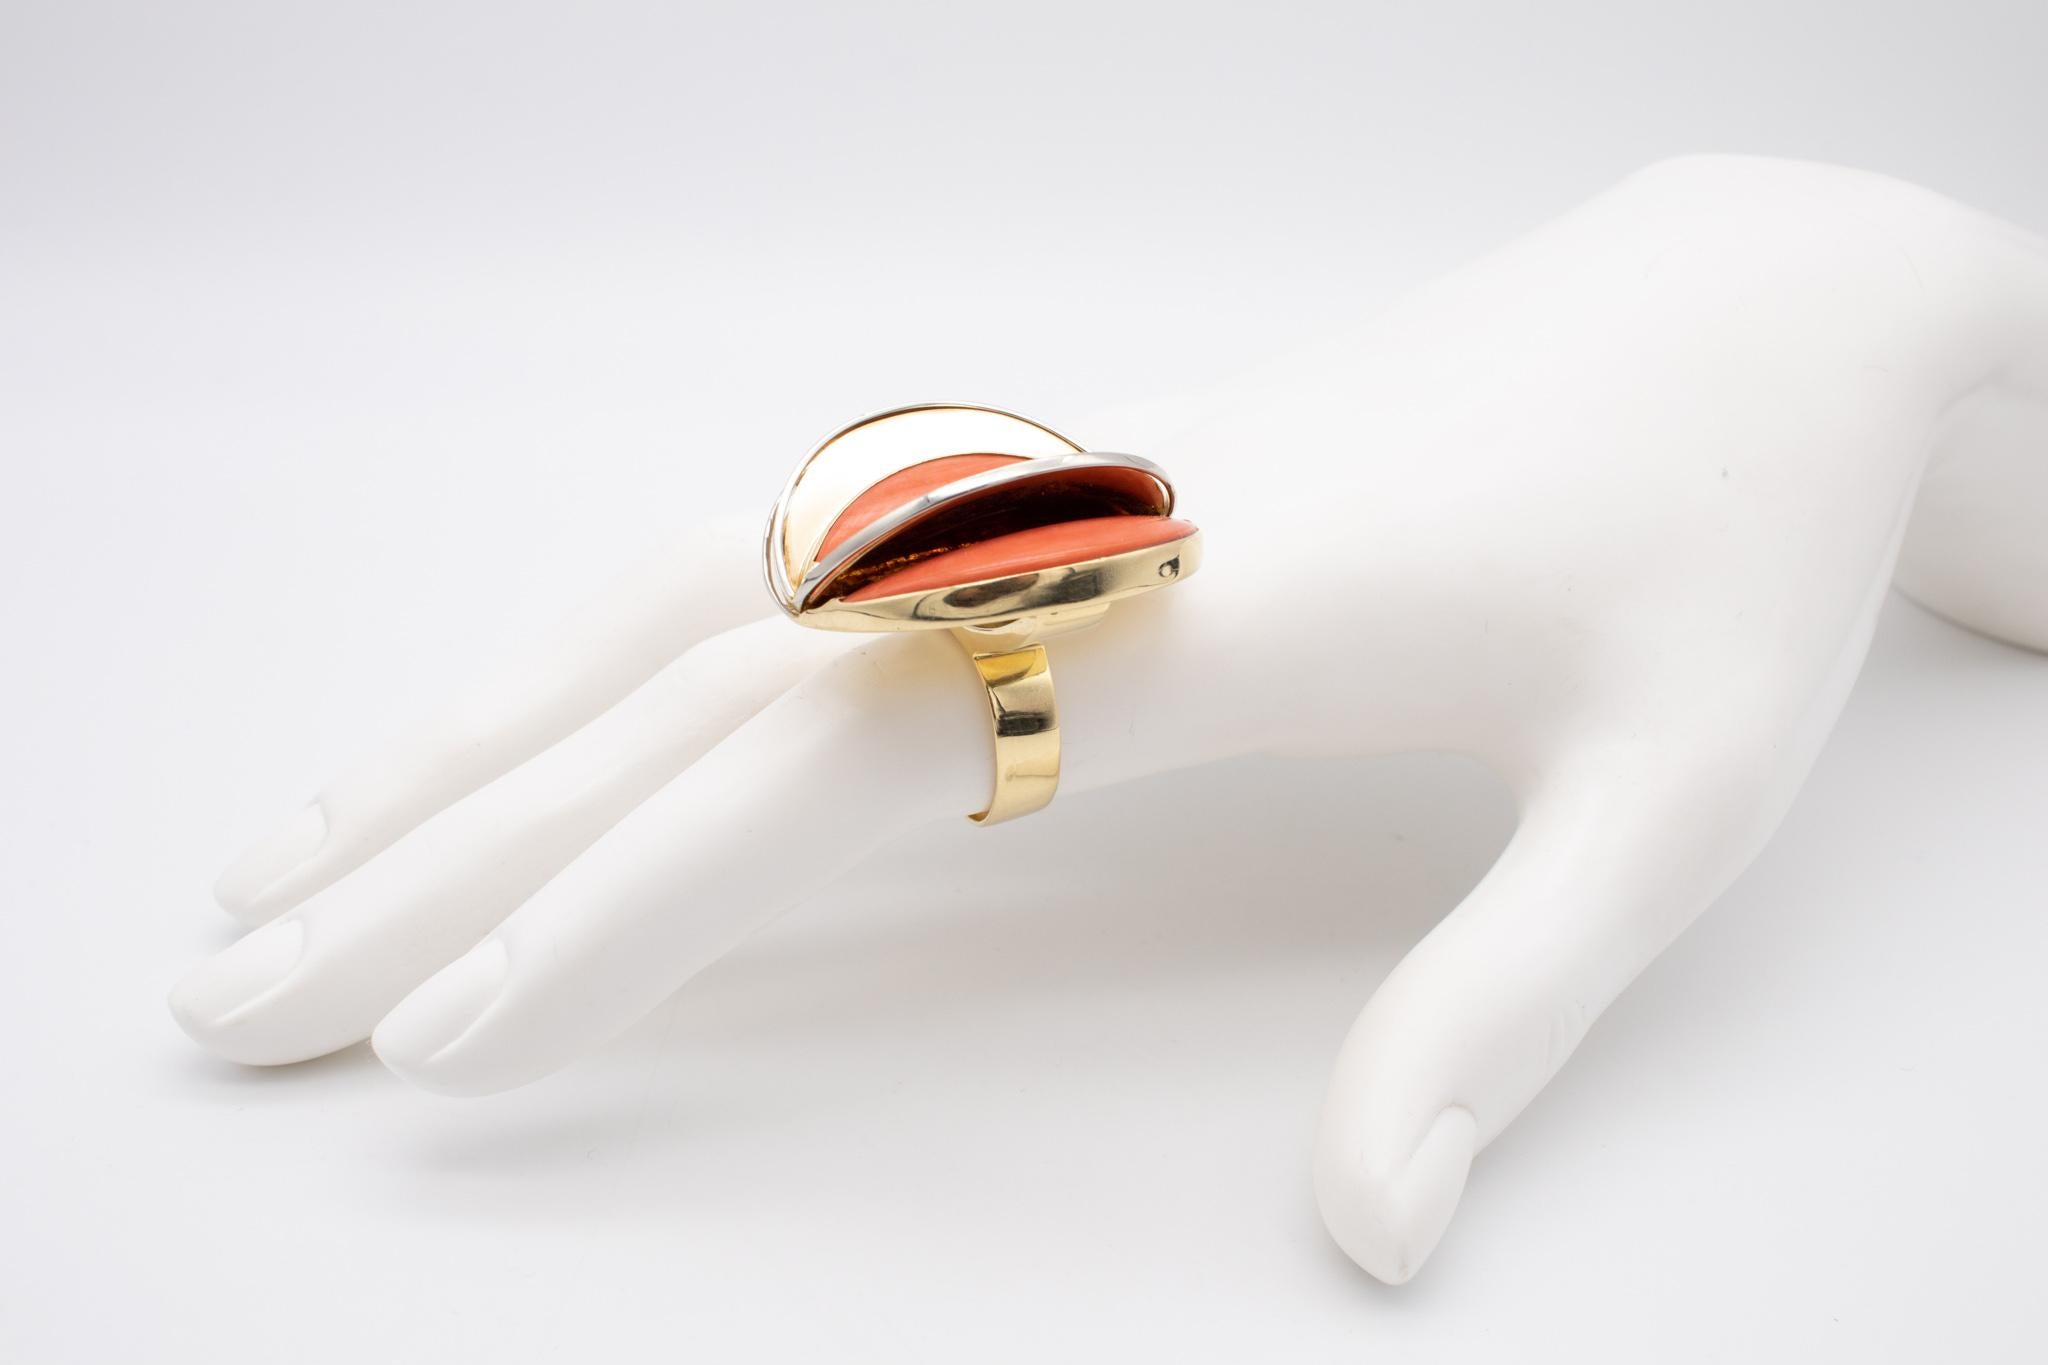 Modernist Laura Rivalta 1977 Italy Geometric Sculptural OP Art Ring 18Kt Gold With Coral For Sale